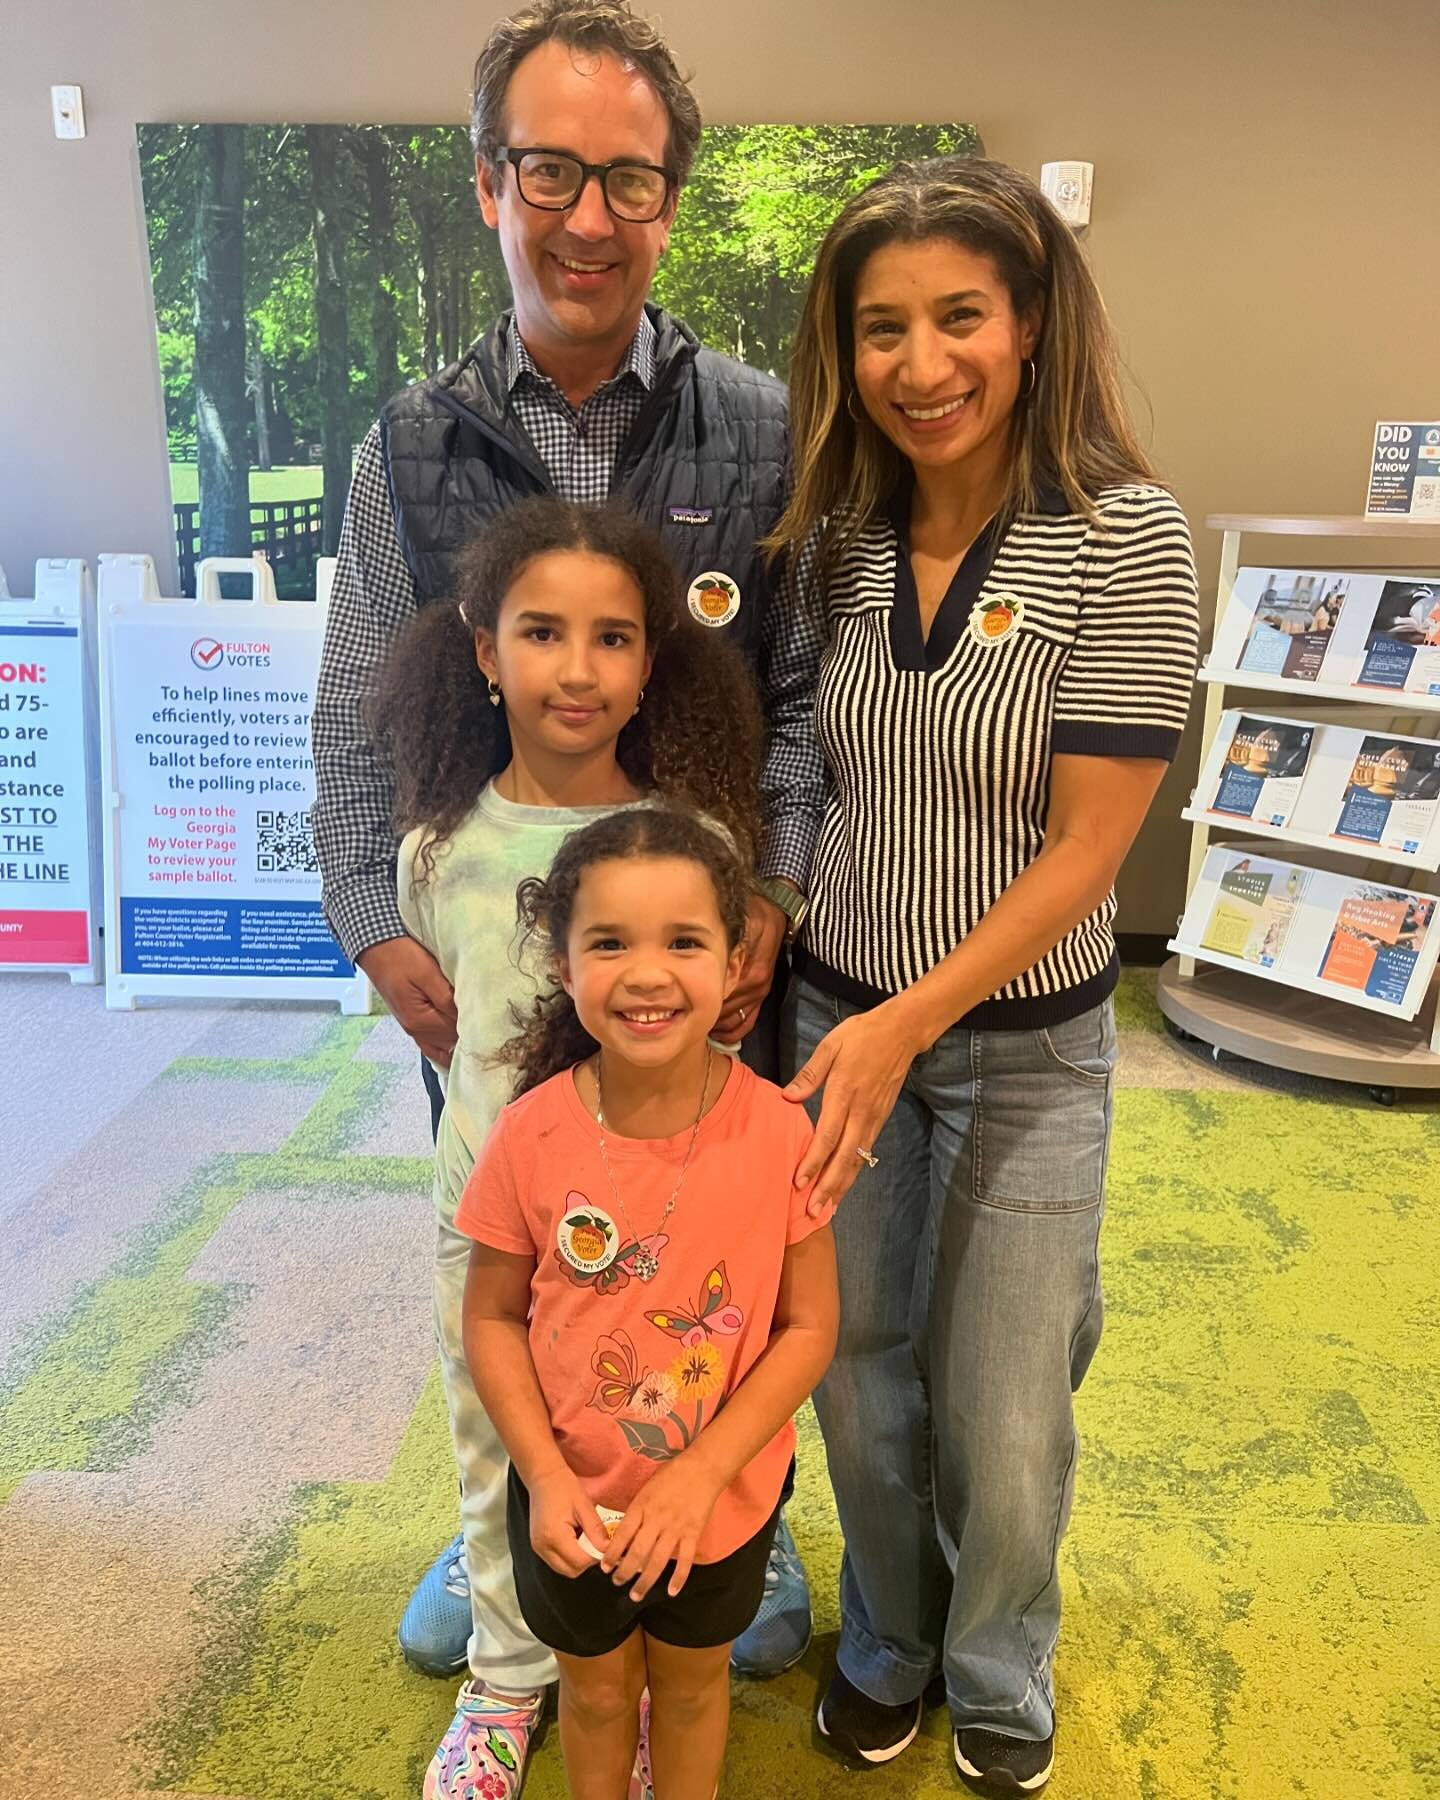 Voted! Pretty amazing to bring two of my girls and show them my name on the actual ballot🥲. 

I&rsquo;m running to ensure a bright future for them and for every family in our community. The time has come for change, and that&rsquo;s what we&rsquo;re